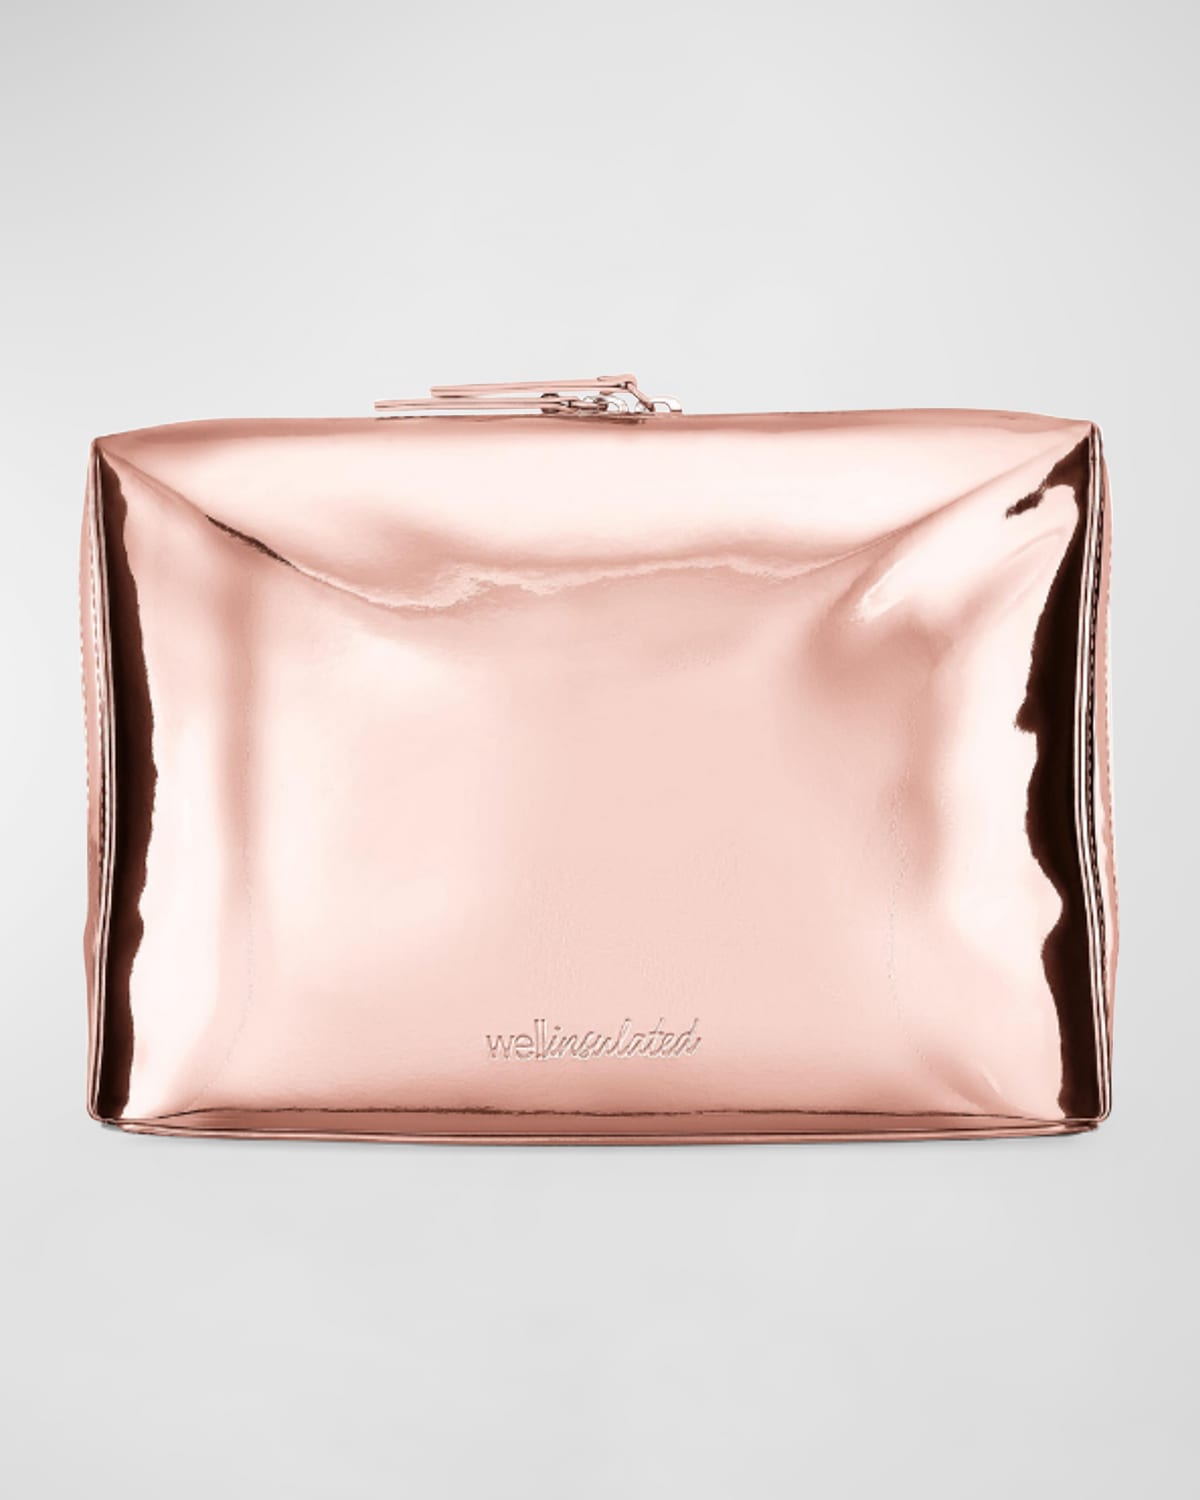 Shop Wellinsulated Performance Beauty Bag, Large In Rose Gold